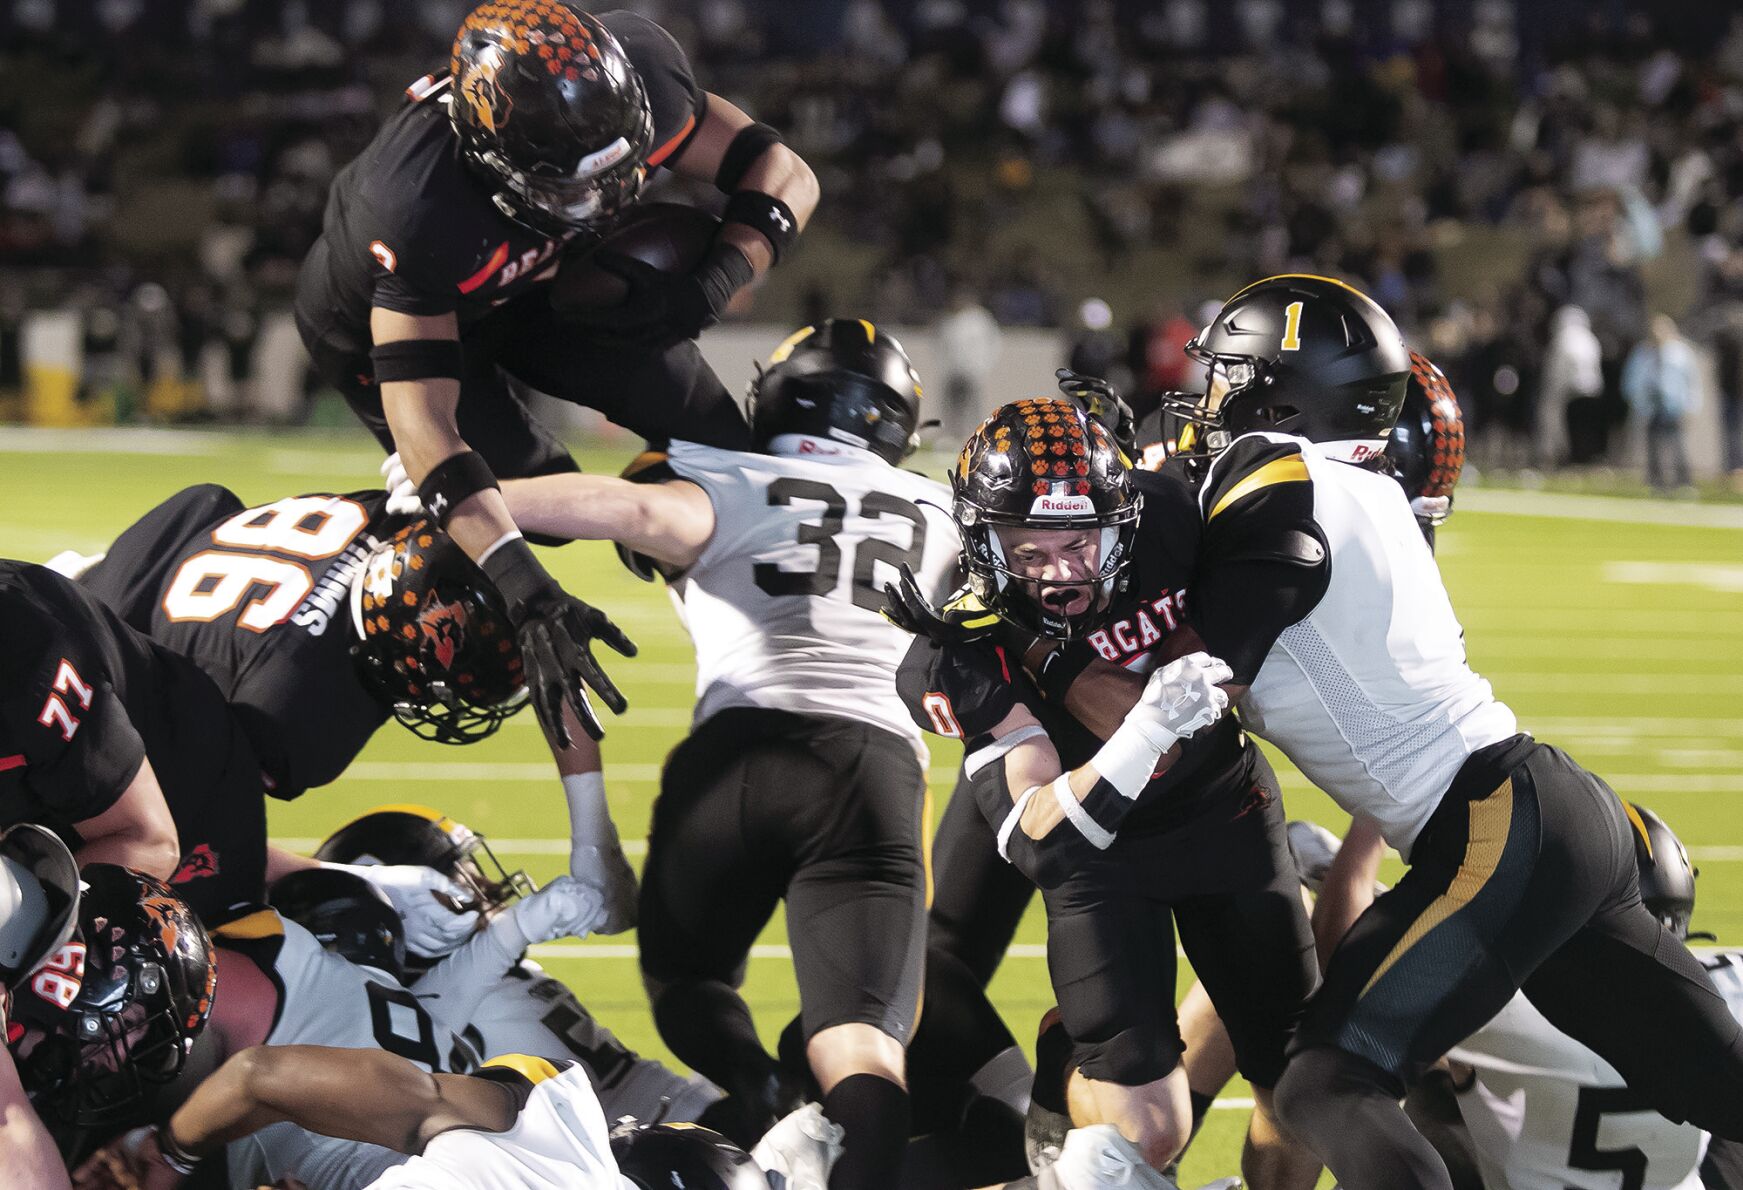 Aledo set to compete for 12th state championship | Sports